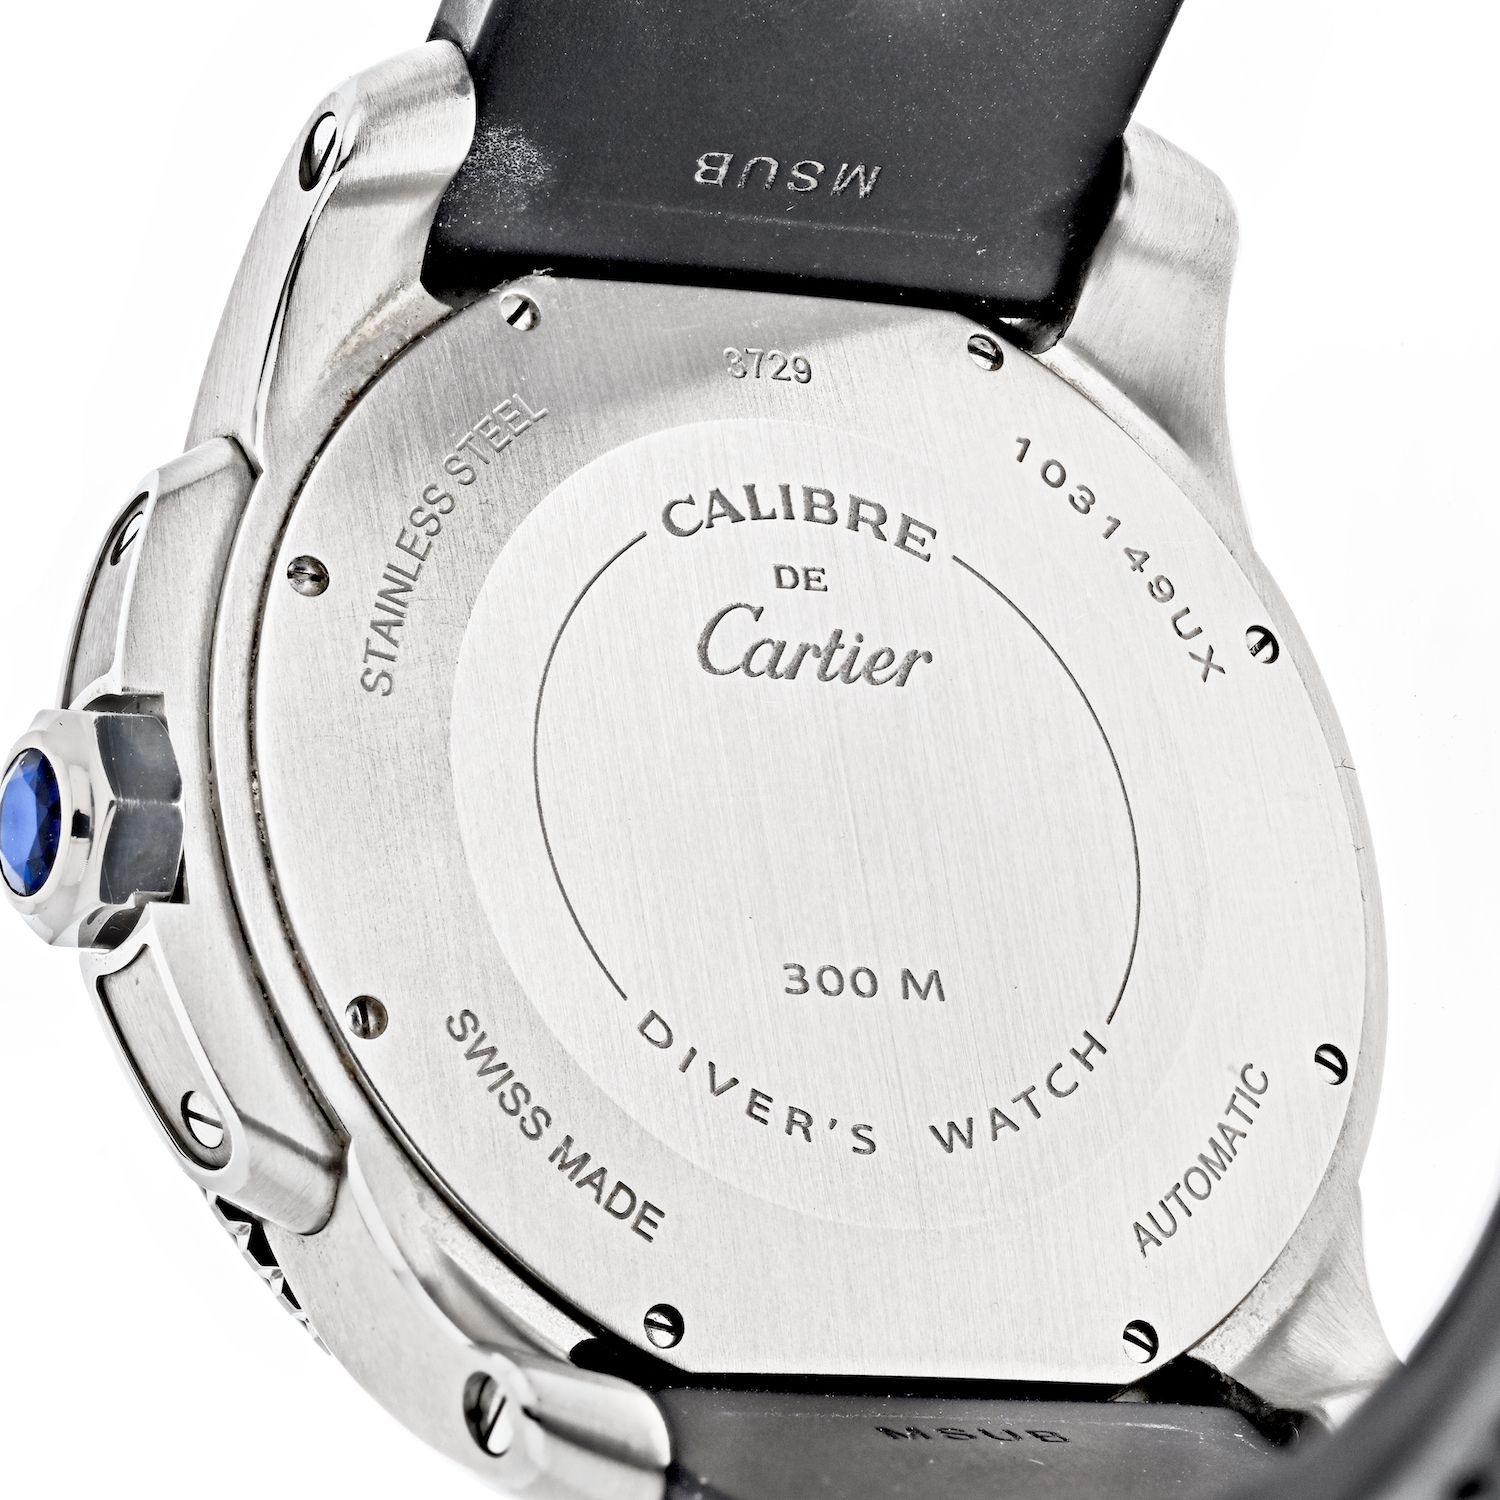 Calibre de Cartier Diver 42.00 mm Automatic Black Dial Stainless steel Men's Watch.
The Cartier W7100056 is a Calibre de cartier category watch. It comes with a black dial that accommodates Roman numerals and elegant minute hands. The dial also has